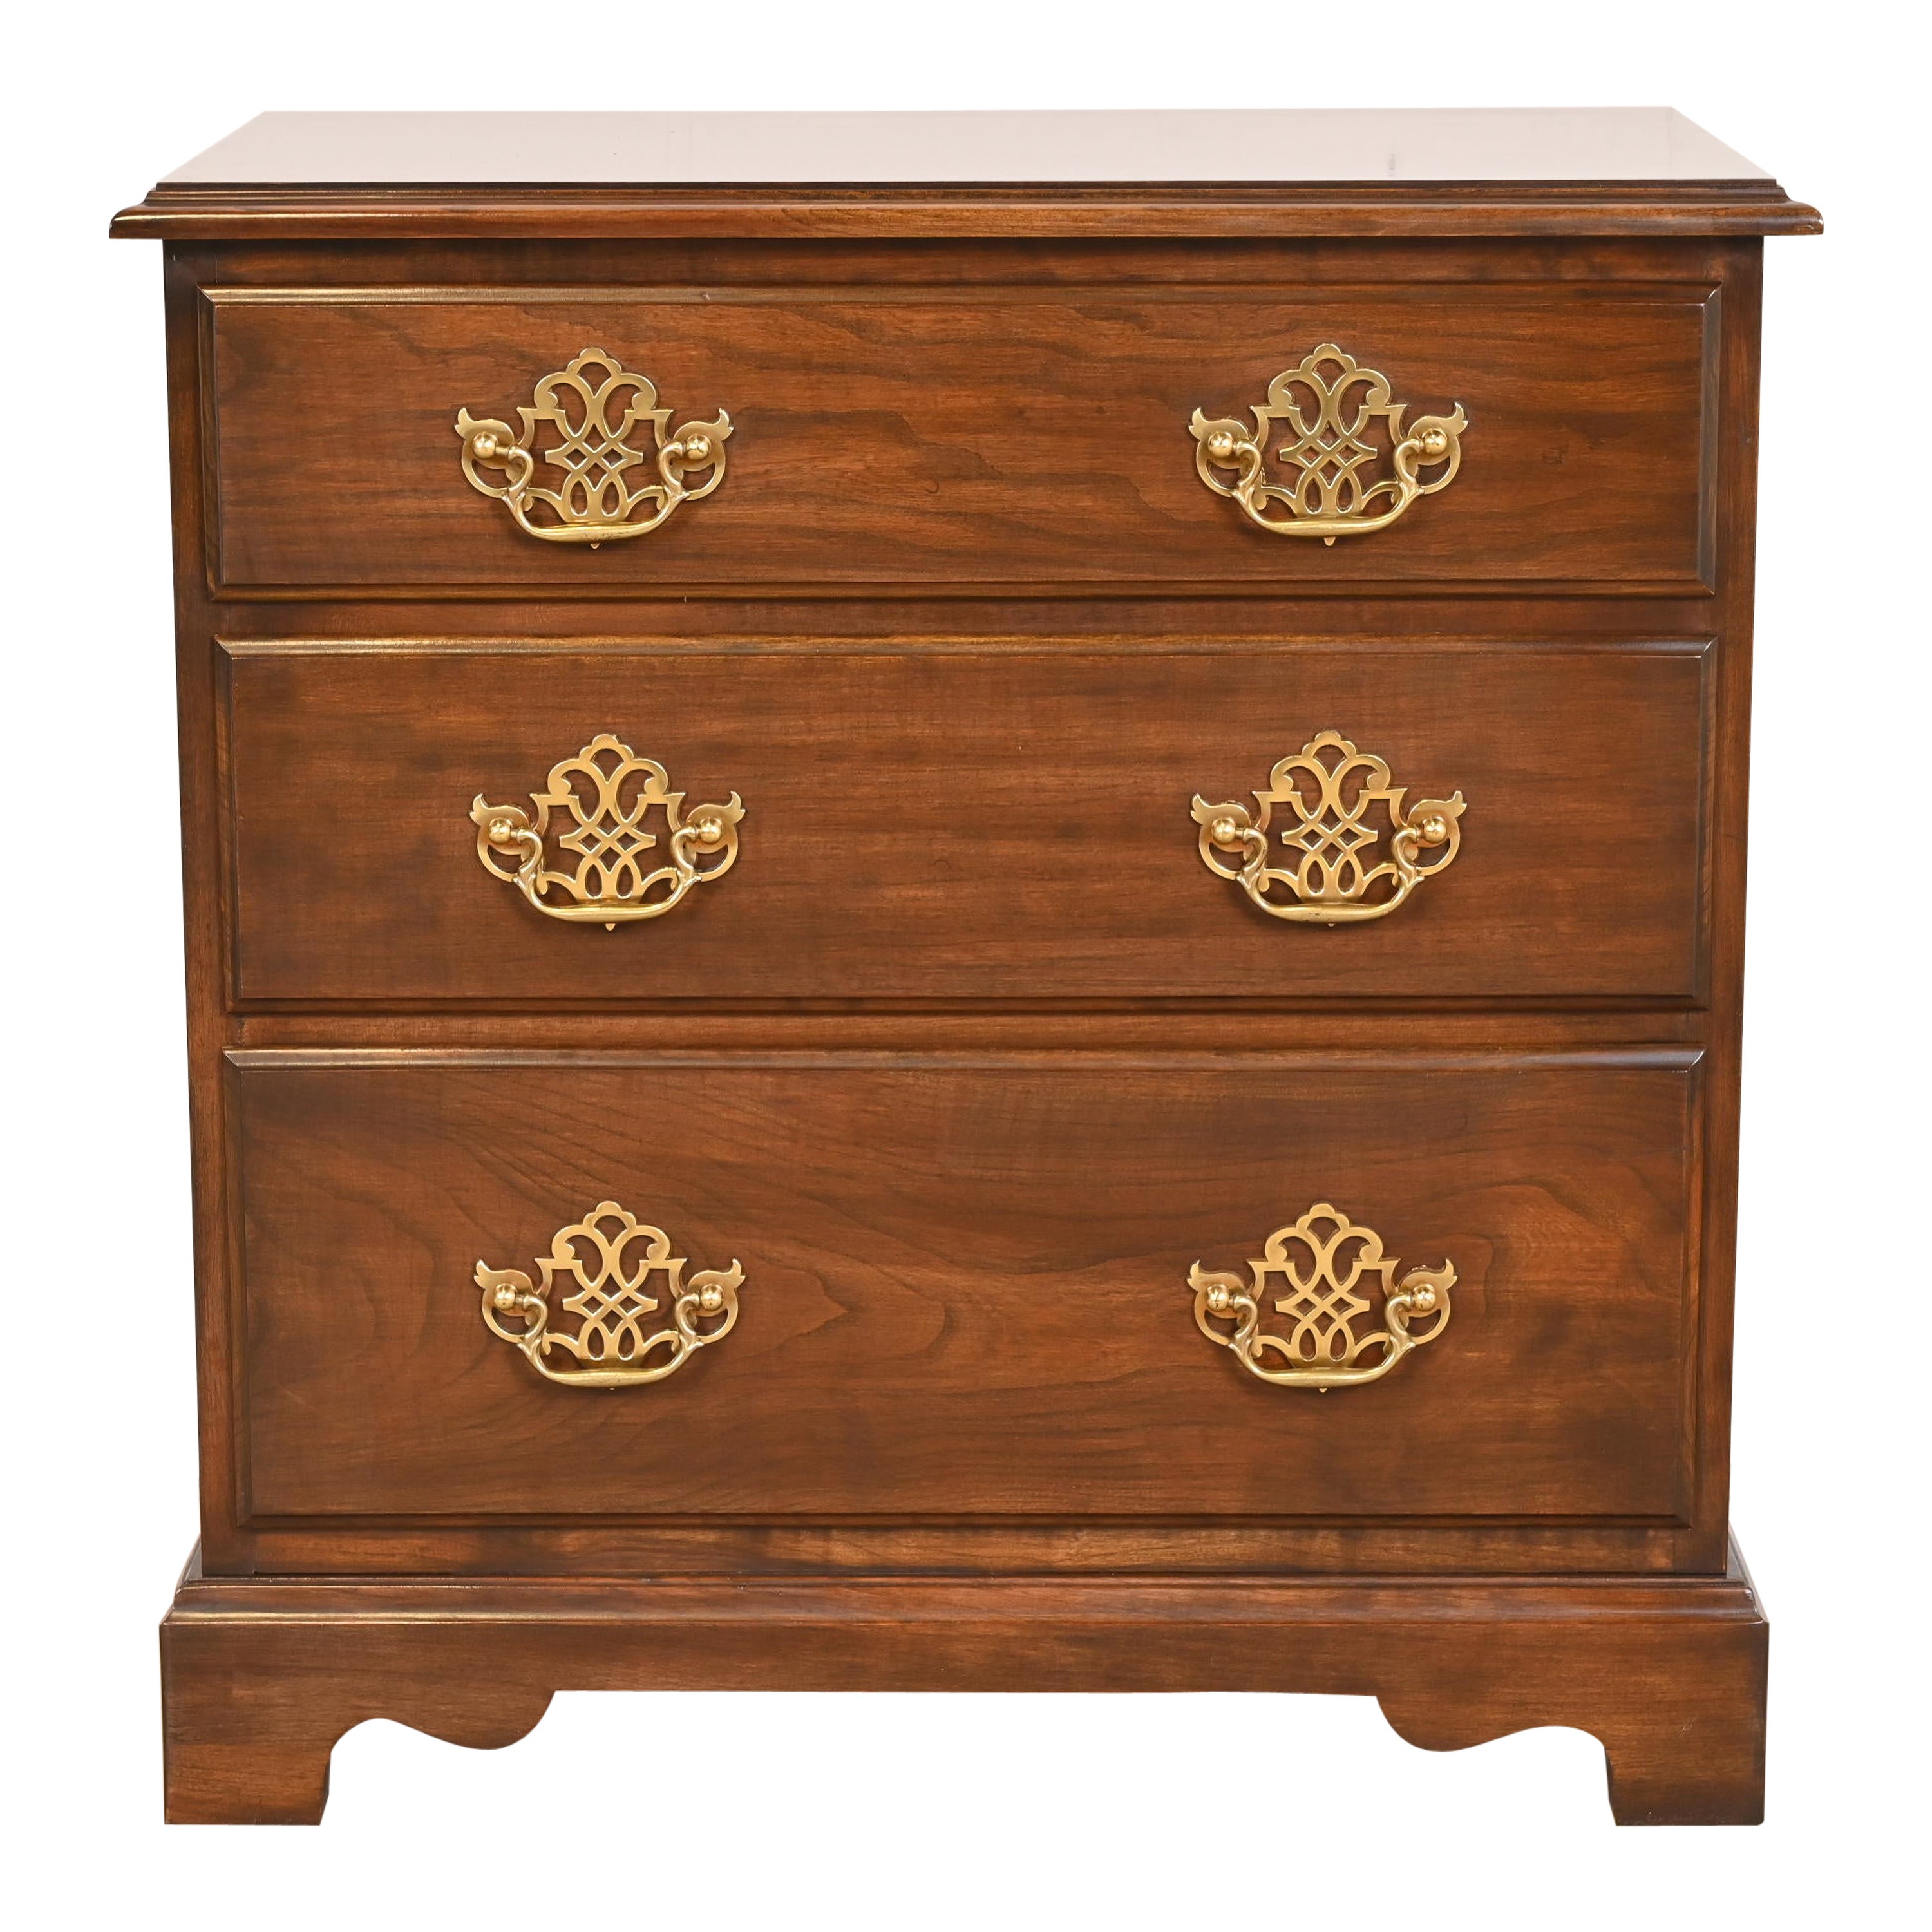 Harden Furniture Georgian Solid Cherry Wood Three-Drawer Bedside Chest For Sale